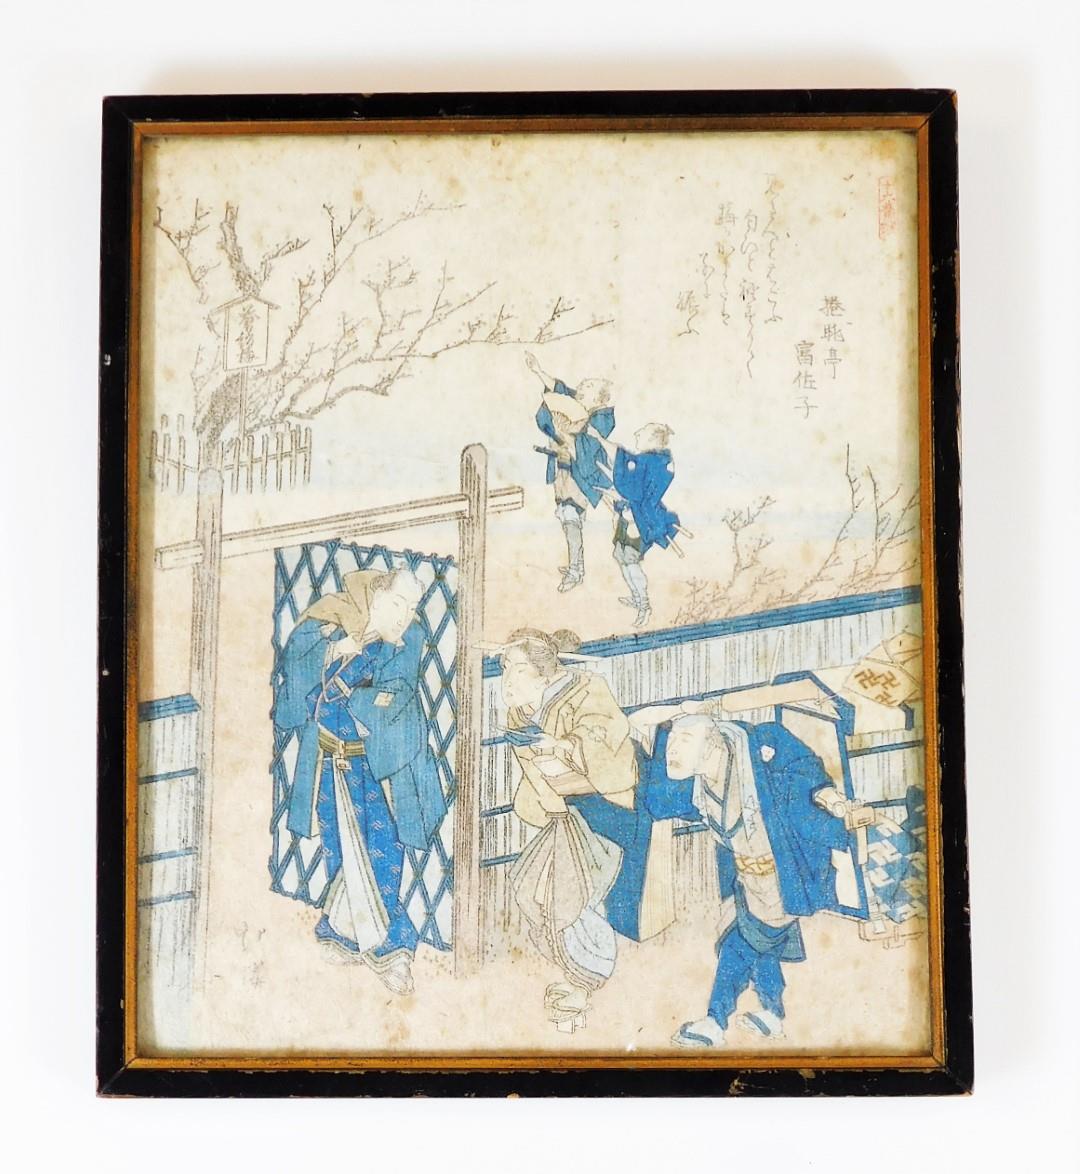 Withdrawn Pre-Sale by Vendor - A Japanese woodblock surimono "Kamata" by Totoya Hokei, depicting - Image 2 of 4